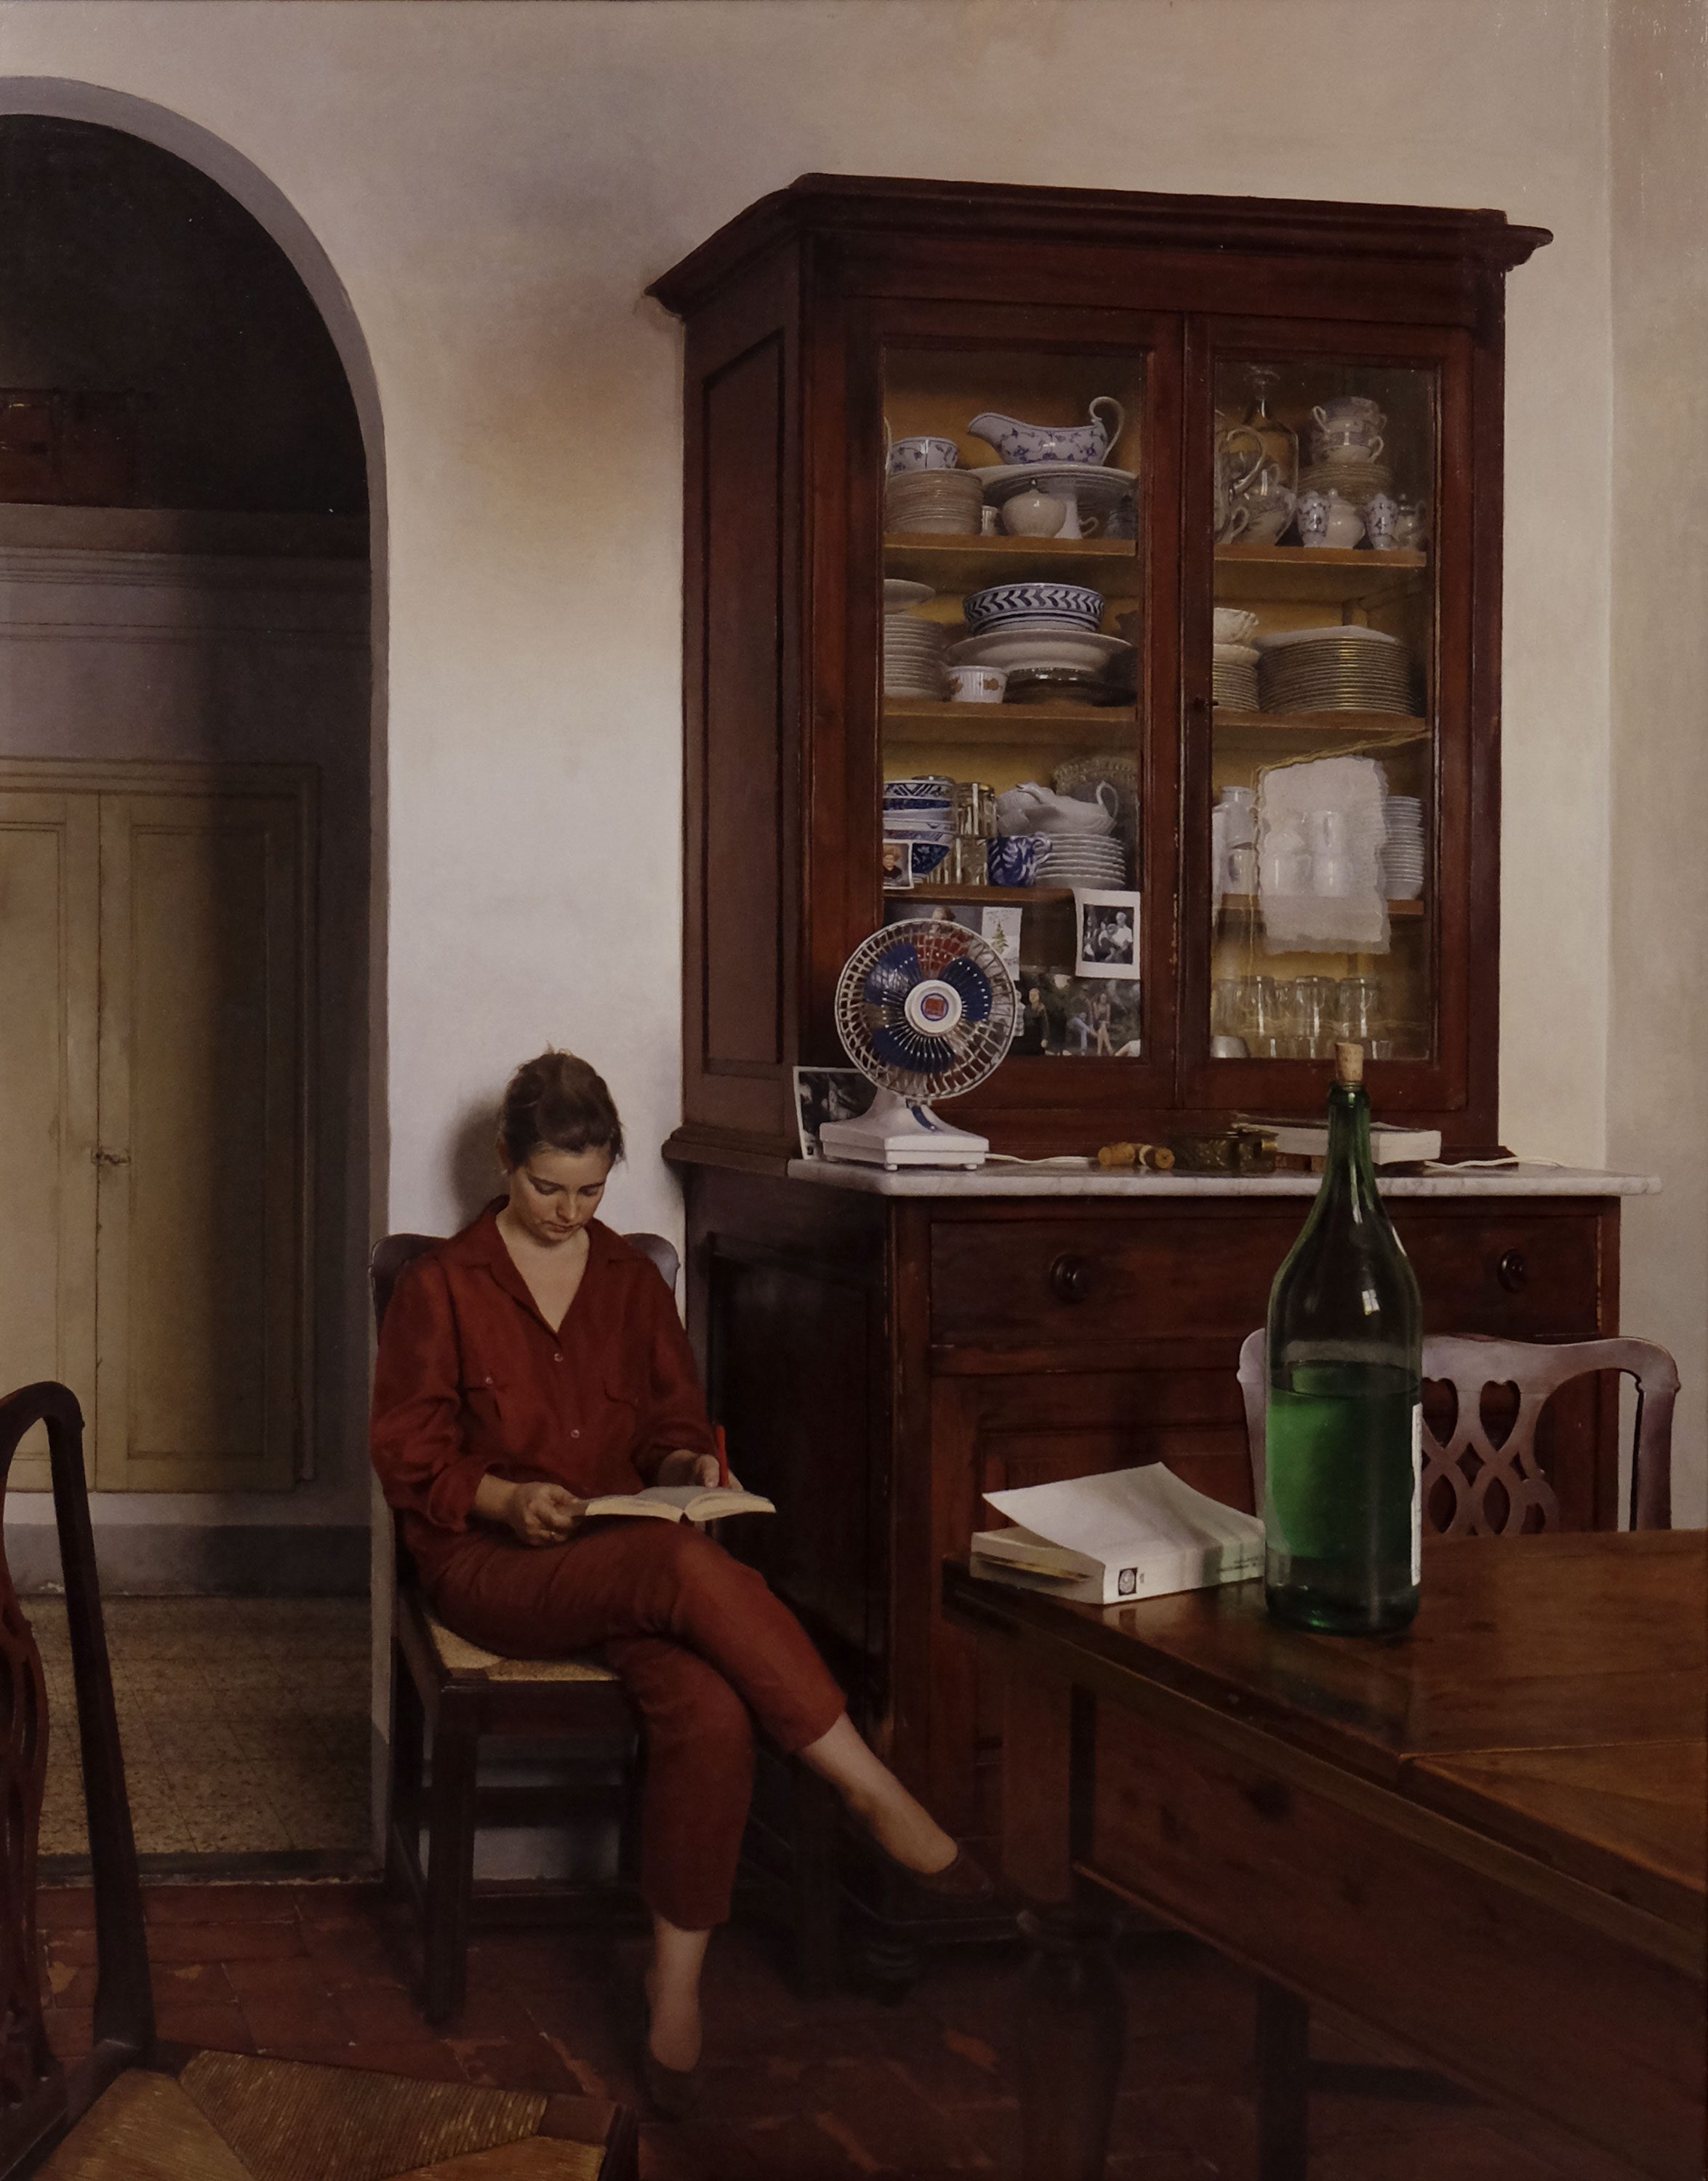 Richard Maury, American, 1935–2020. Interior with Stefania, 1992. Oil on canvas mounted on panel, 55 ⅛ x 43 ⅜ in. Gift of Mary Mallery Davis, by exchange, 1994.6